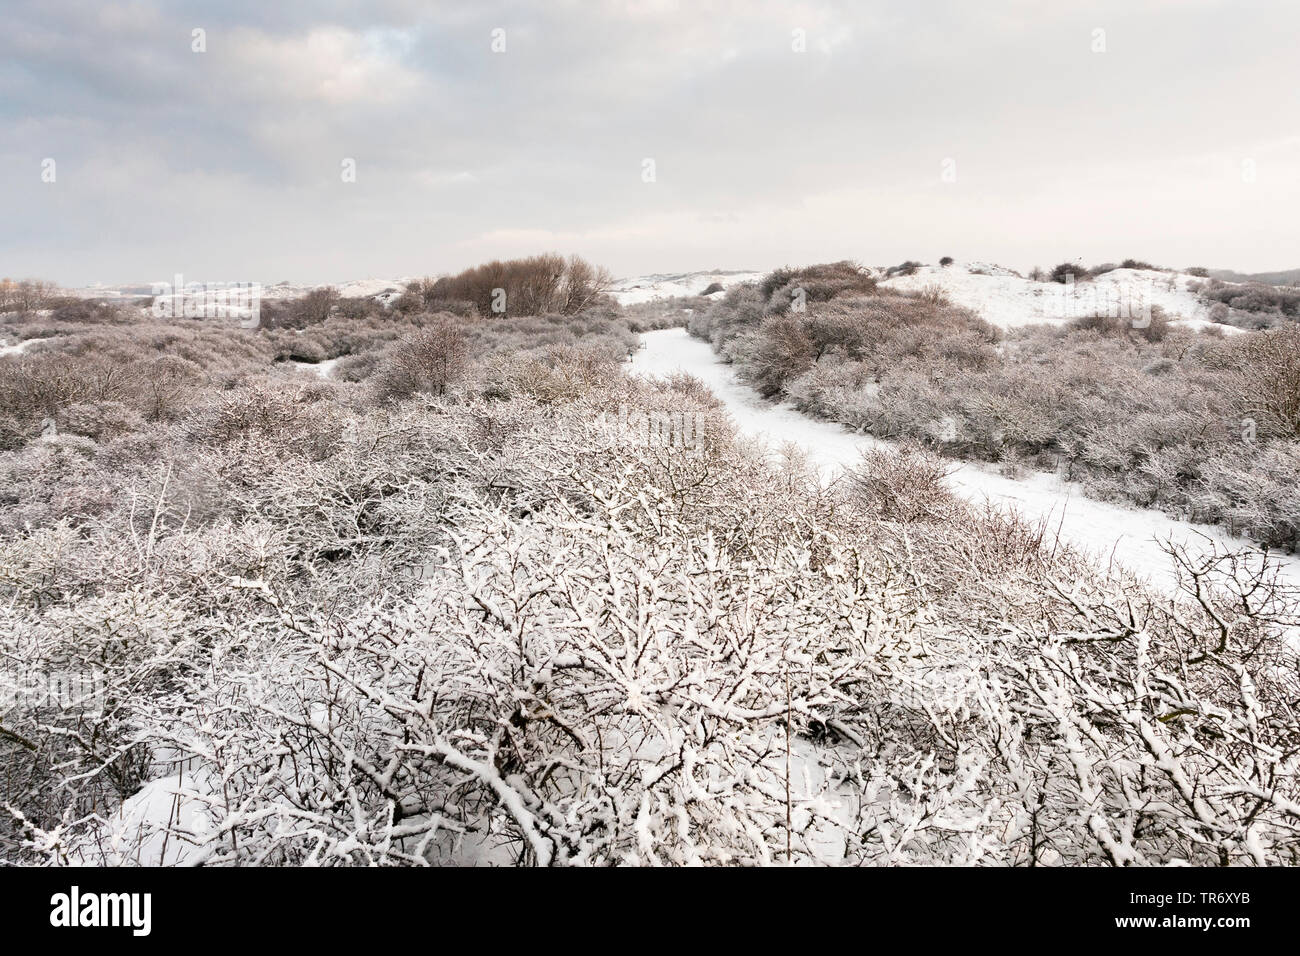 Percorso escursionistico throuhg paesaggio innevato a Hollands Duin in inverno, Paesi Bassi, South Holland, Hollandse Duinen National Park, Katwijk aan Zee Foto Stock